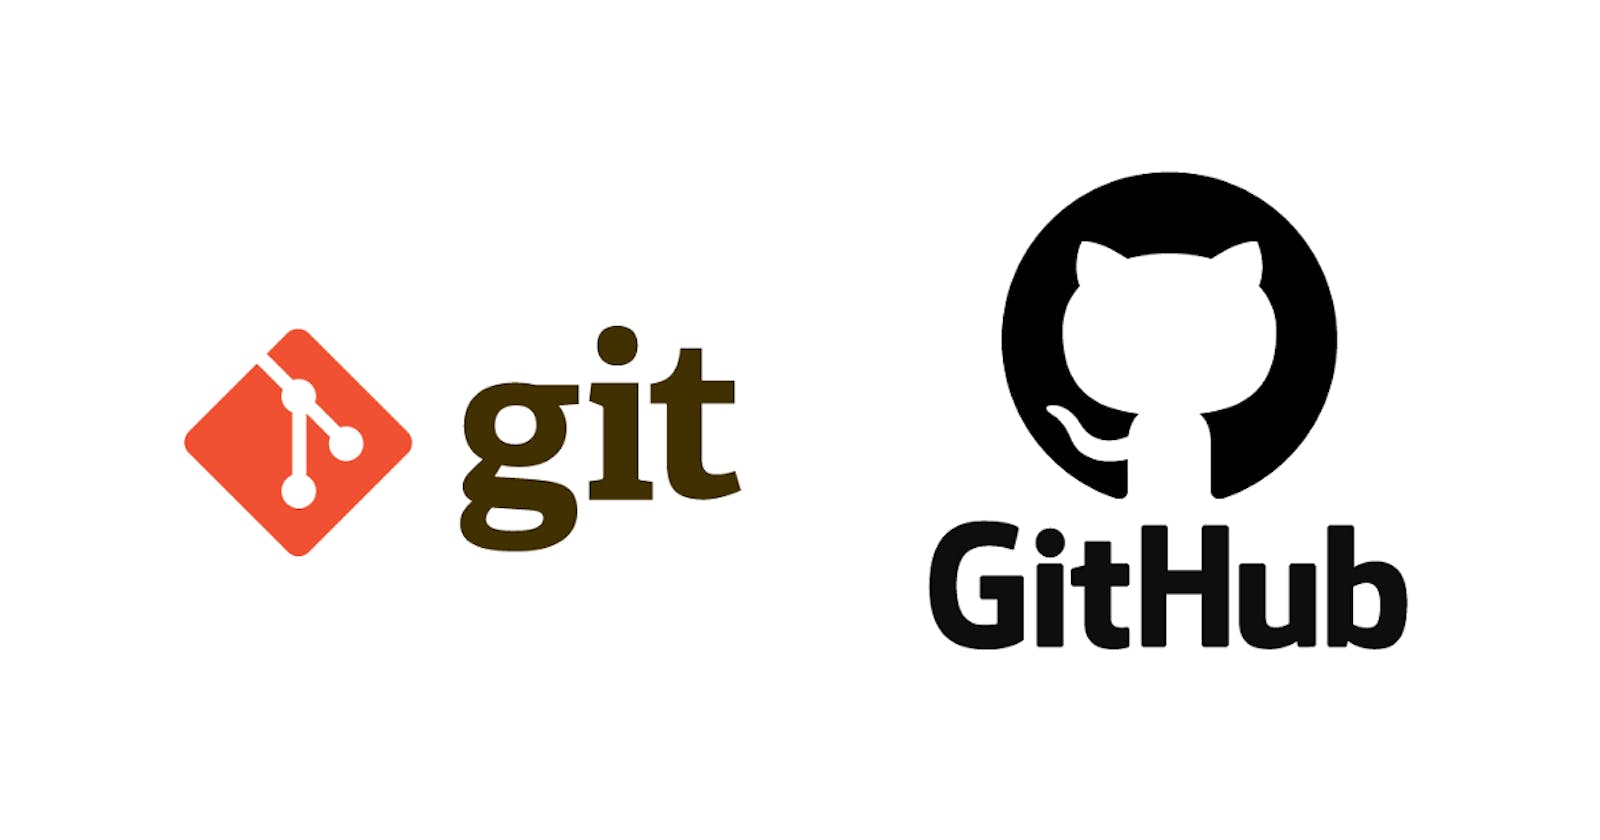 #Day 11. Git GitHub Continued.